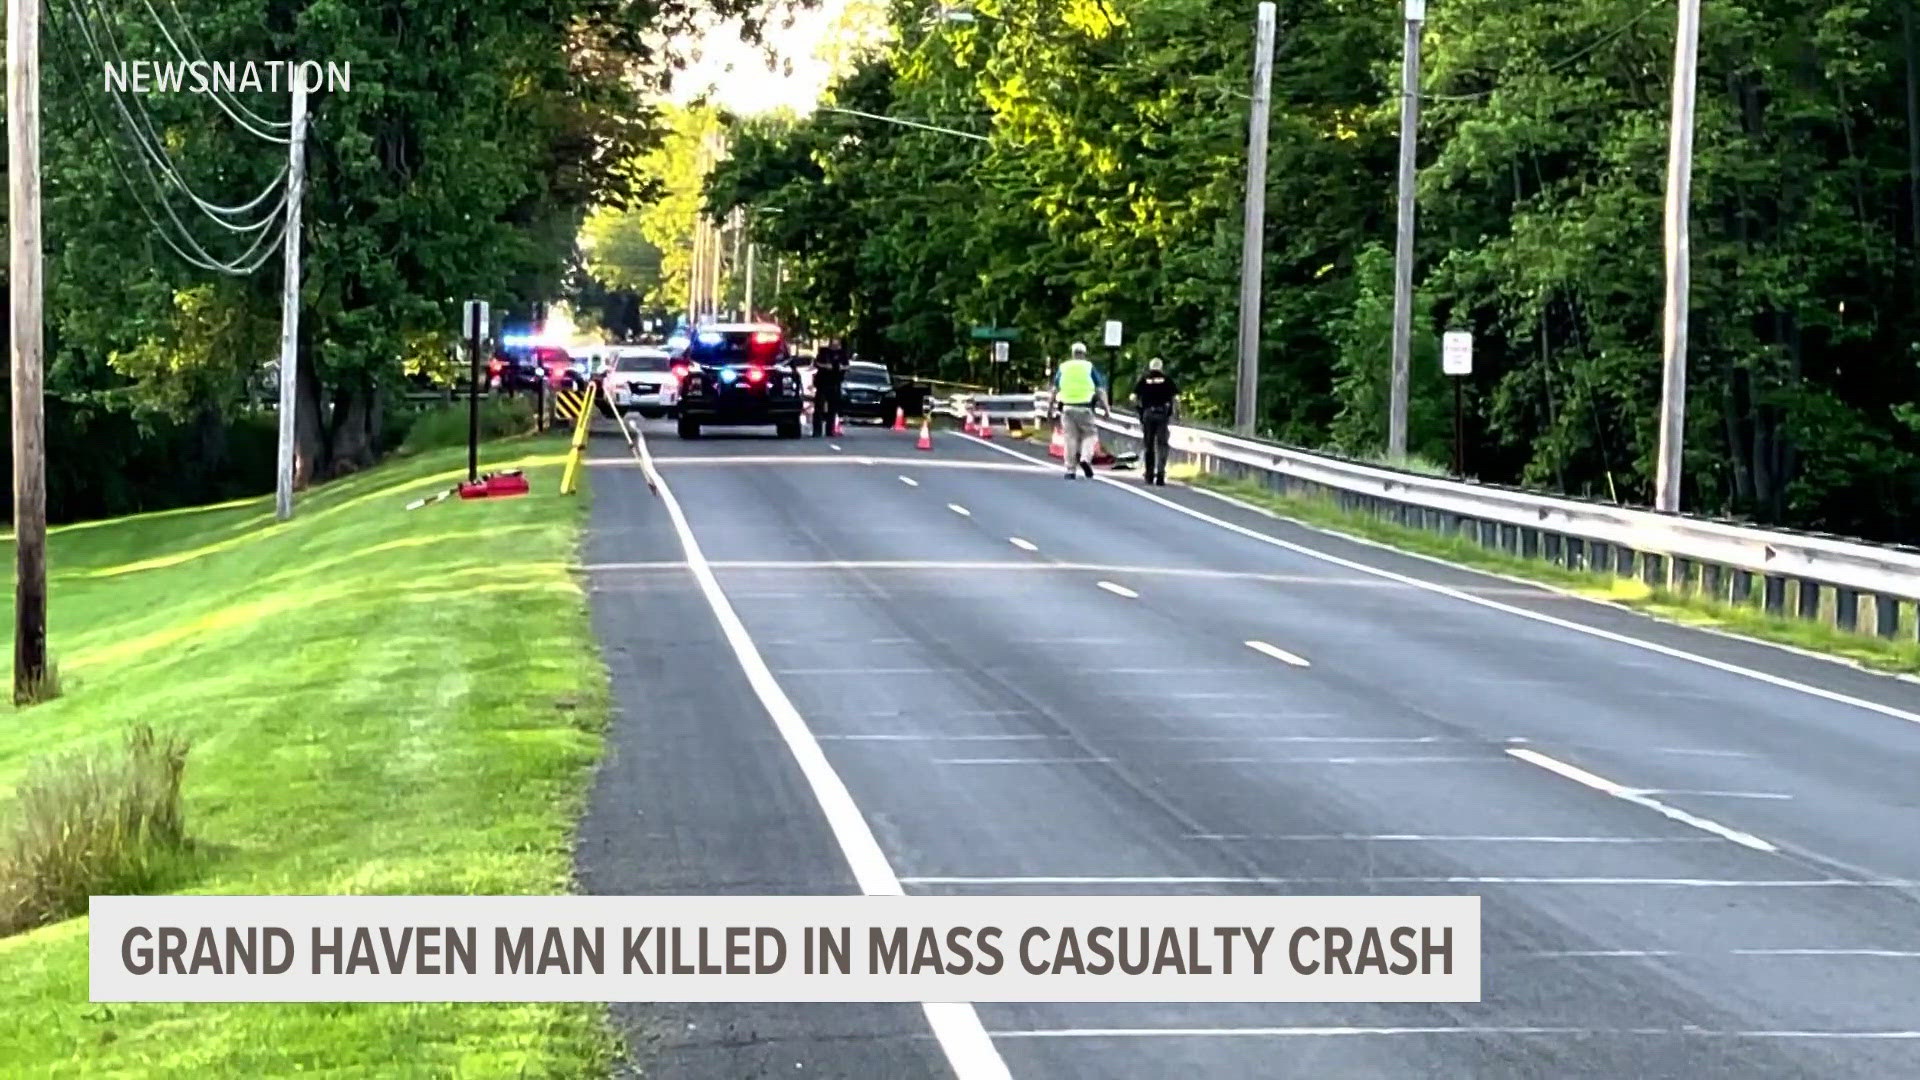 Deputies say the group was a family. A Grand Haven man and a Grand Ledge man were killed. A total of 14 others, mostly children, were injured.